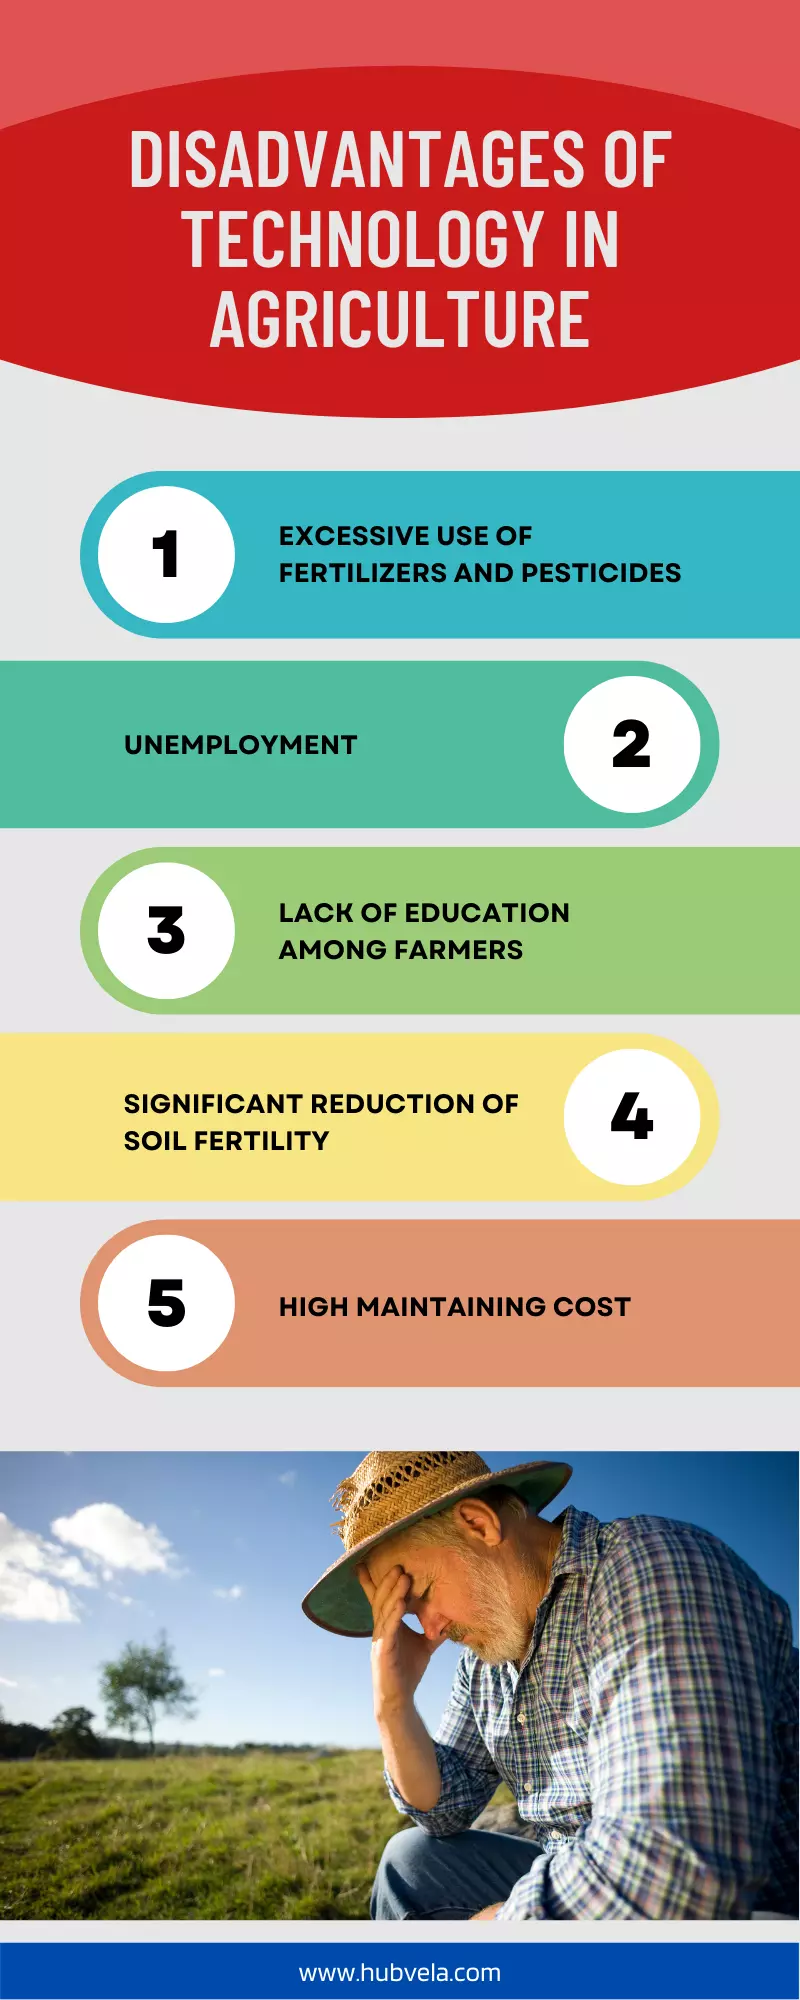 Technology disadvantages in agriculture infographic